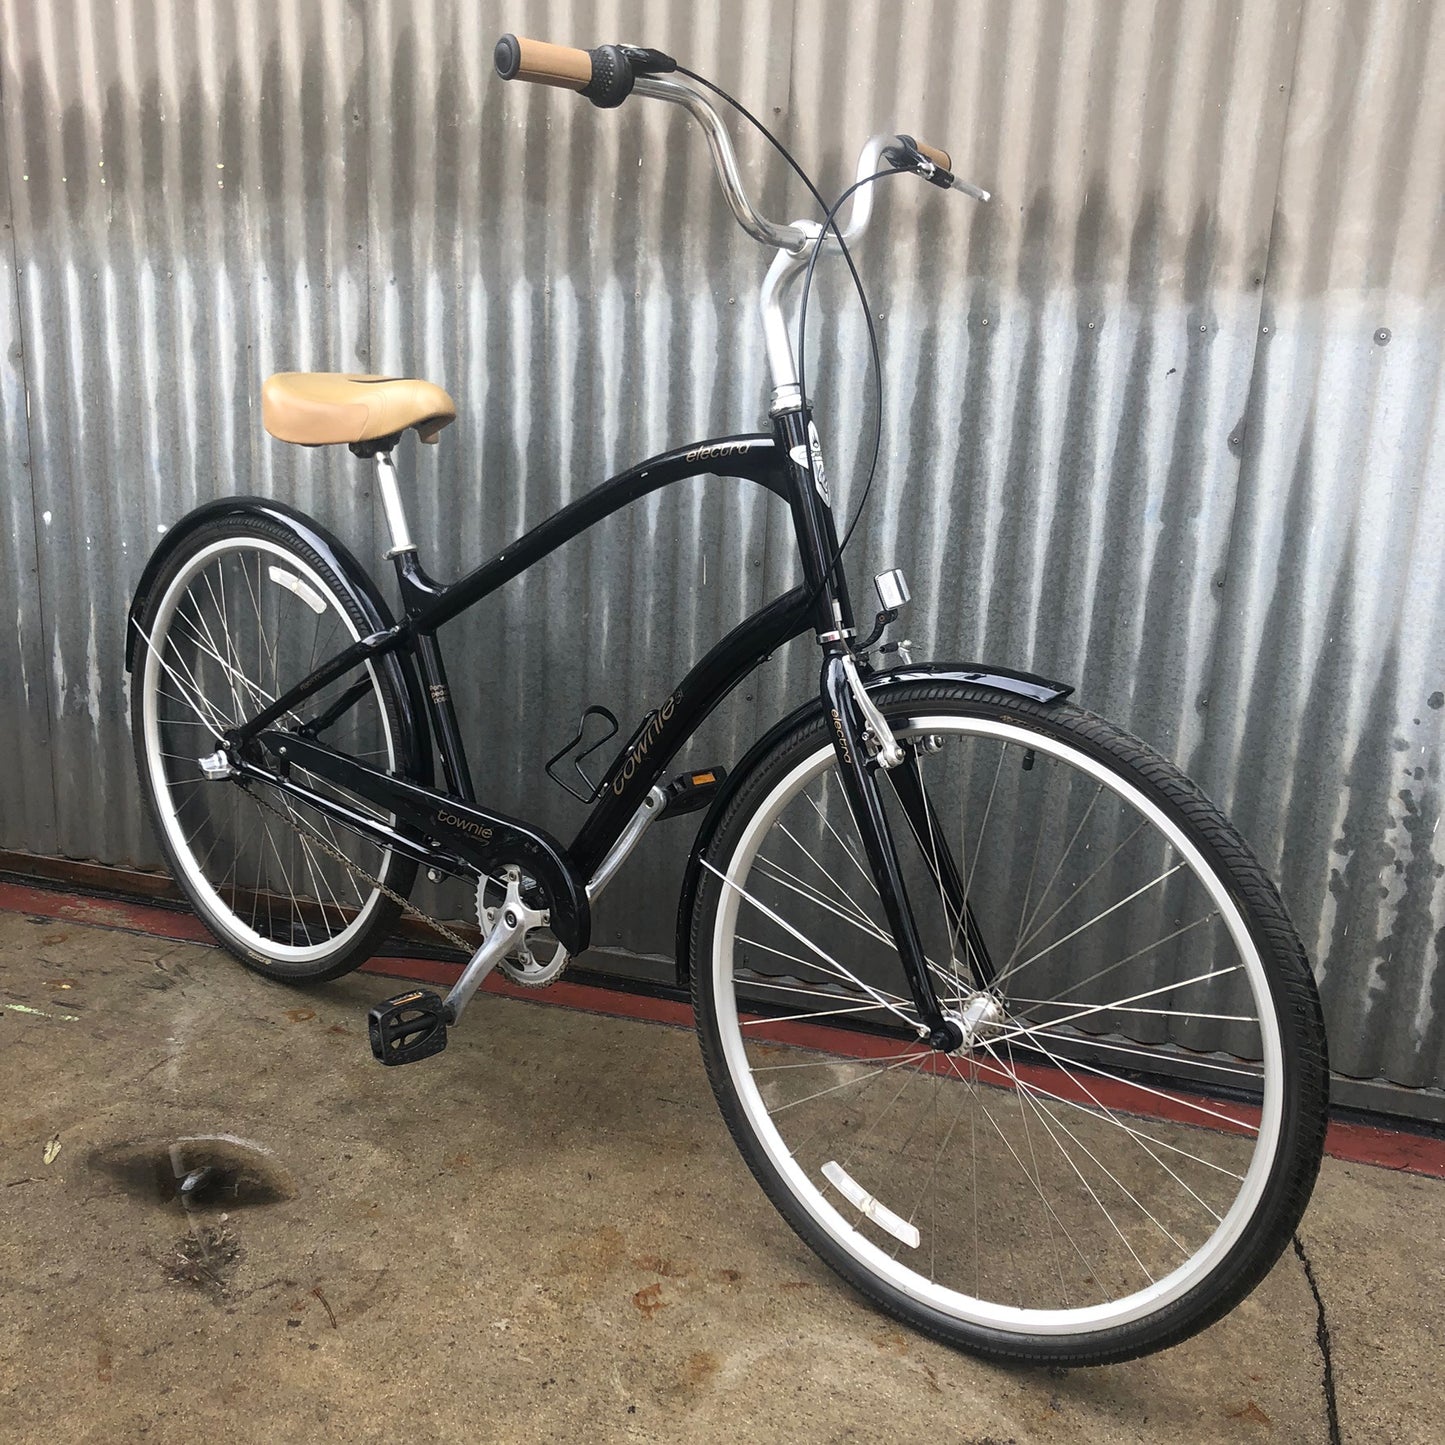 Electra Townie - Extreme Upright City Bike - Used - Super Friendly Rider for a Nervous Rider